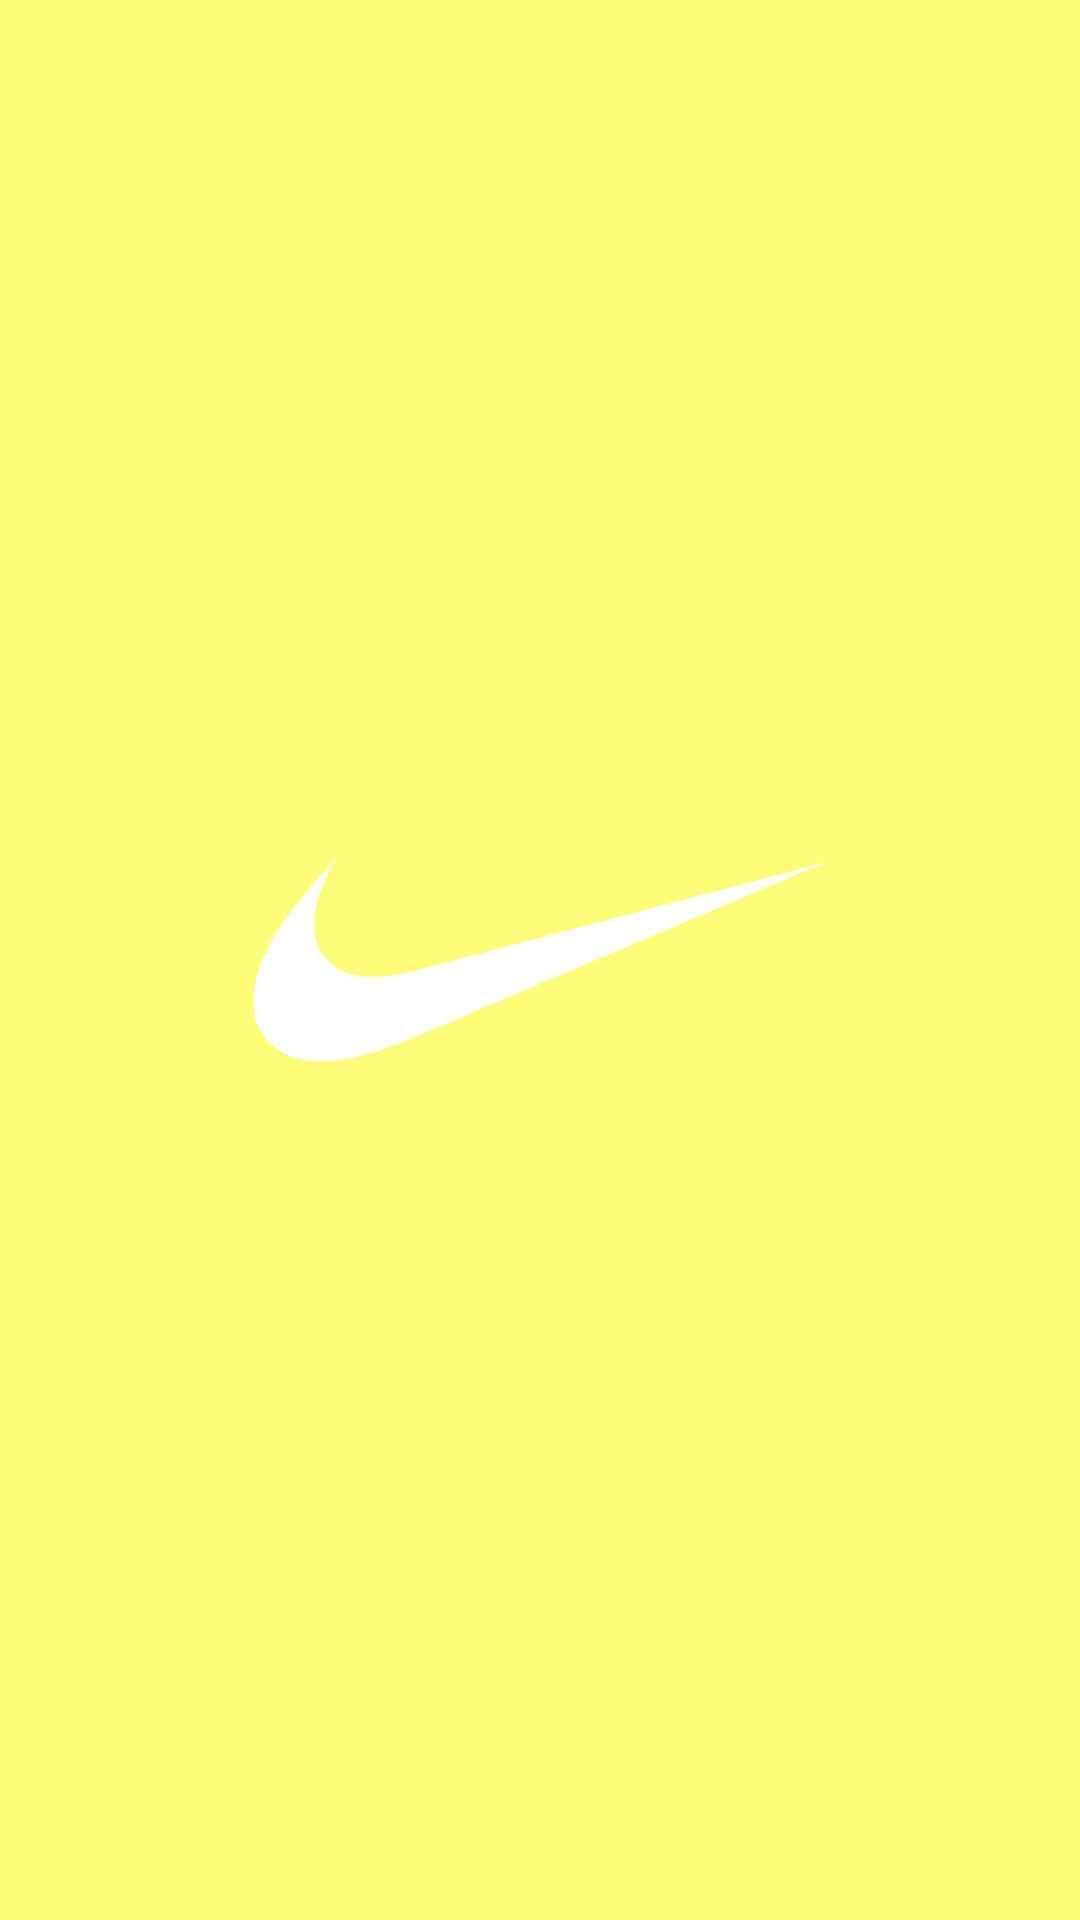 Simplistic Solid Yellow Background